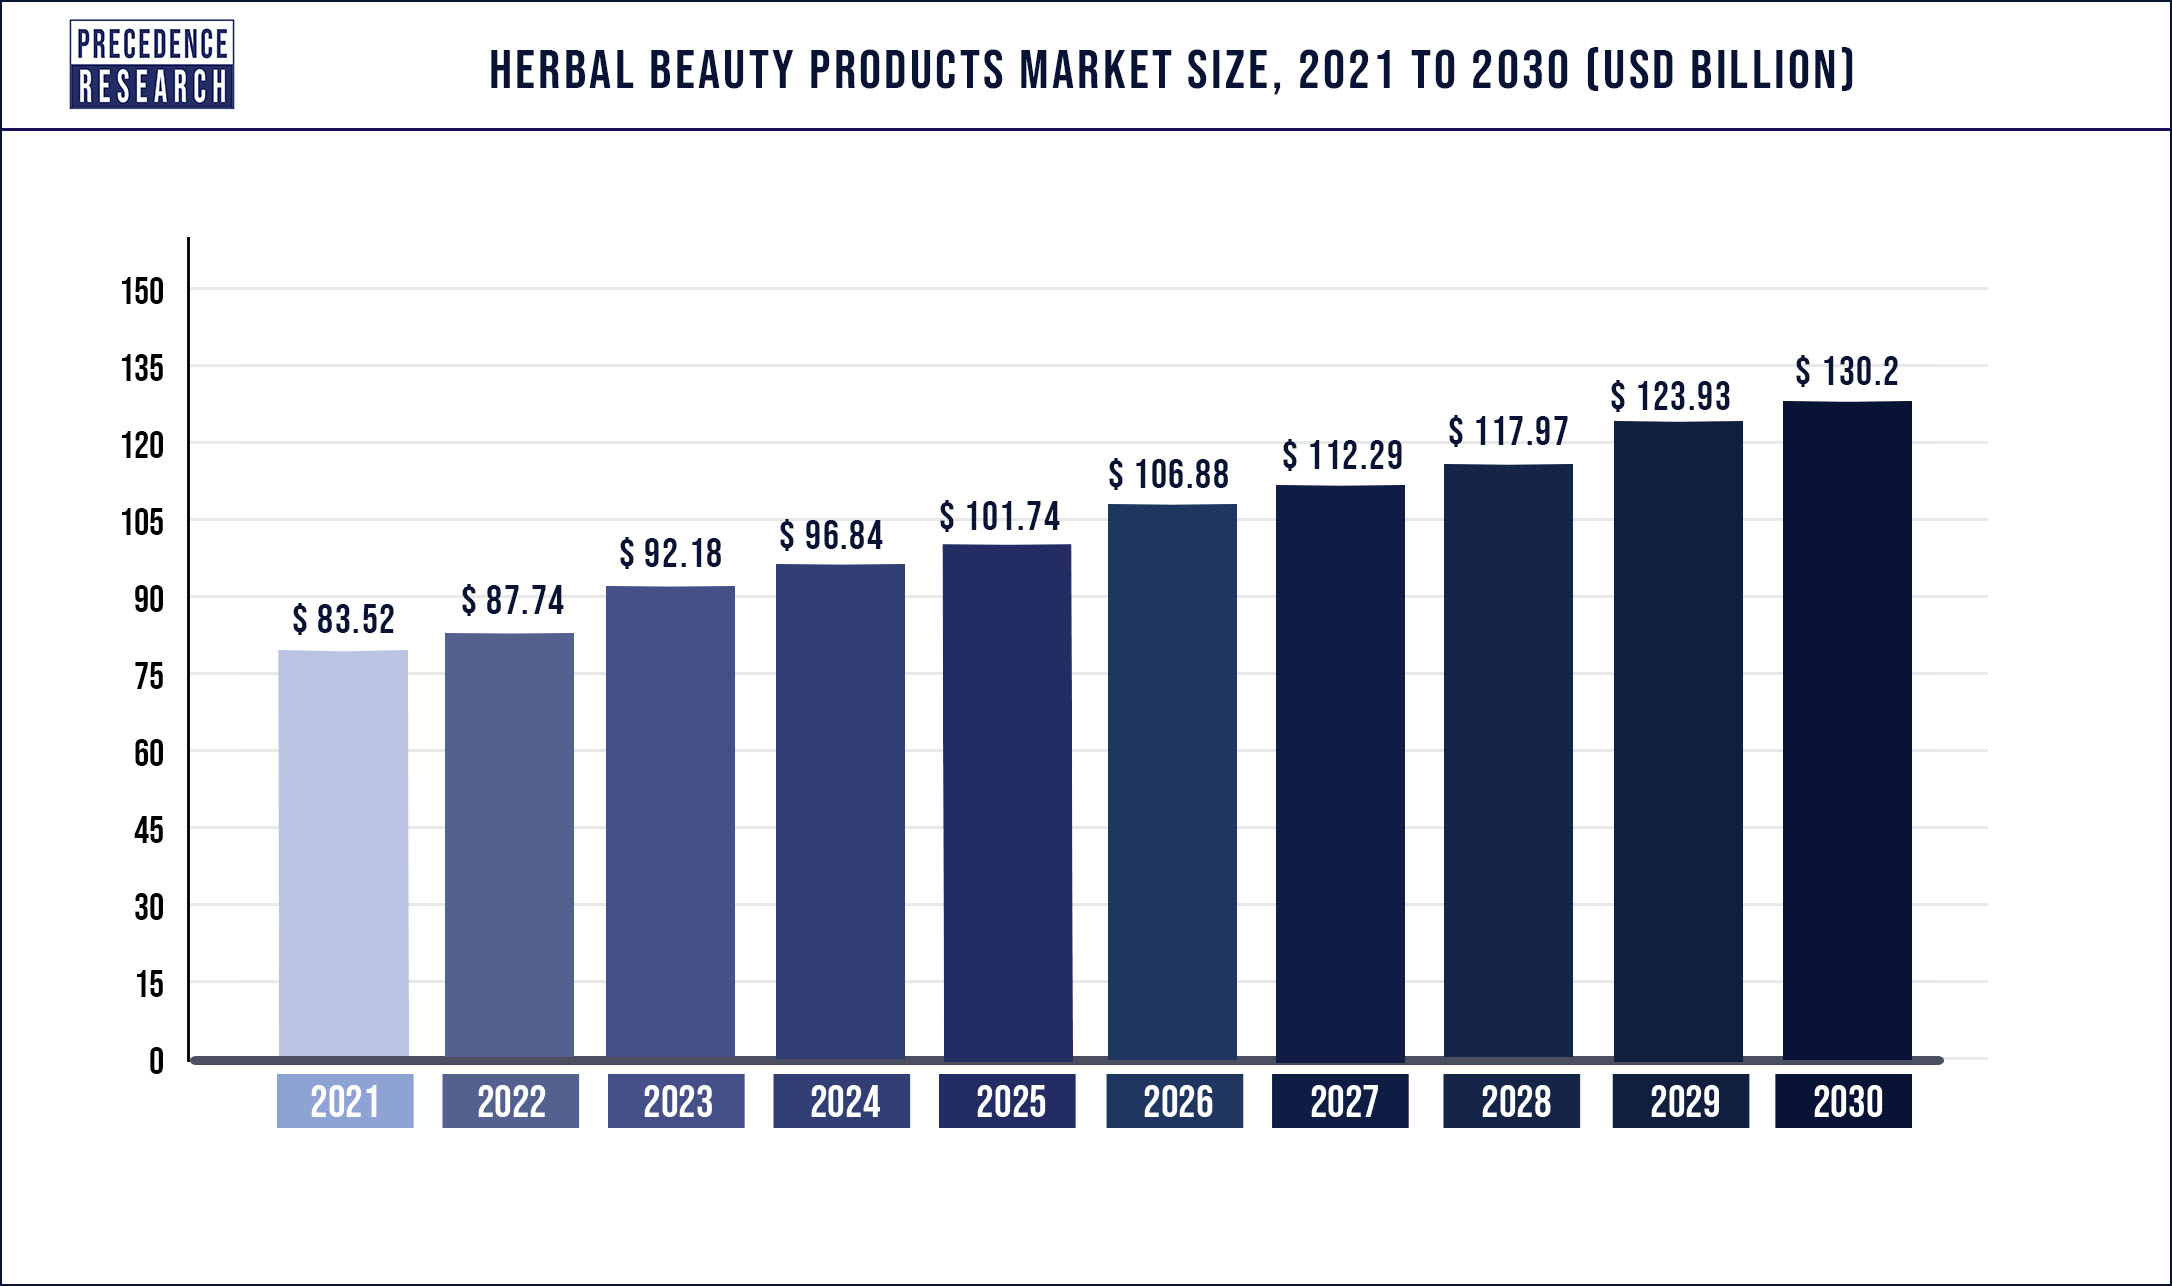 Herbal Beauty Products Market Size to Exceed US$ 130.2 Billion by 2030 | Says Precedence Research